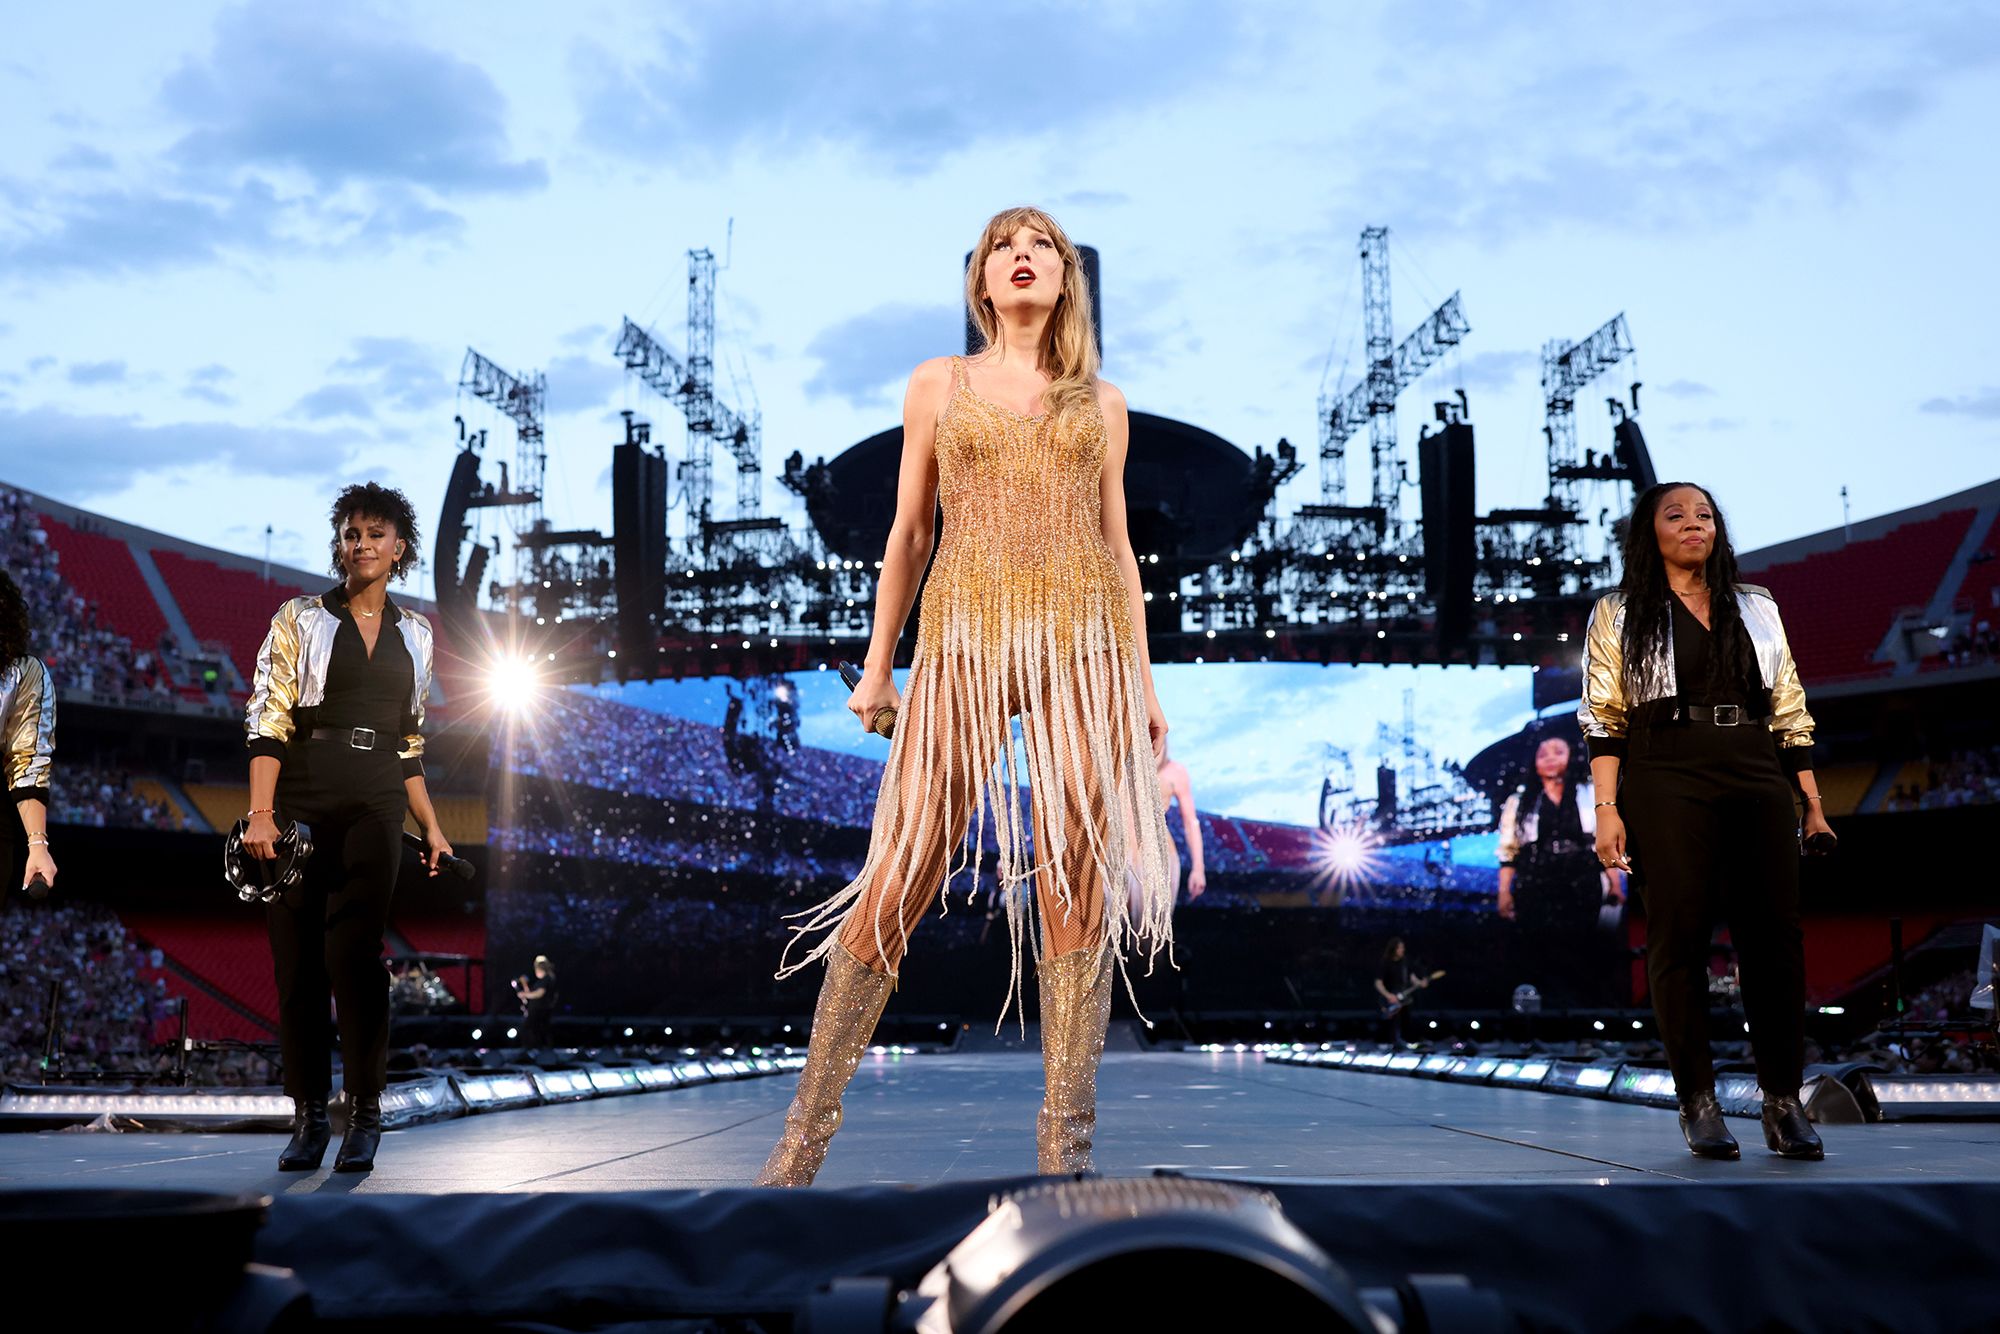 Ticketmaster halts Swift tickets sales in France due to glitch